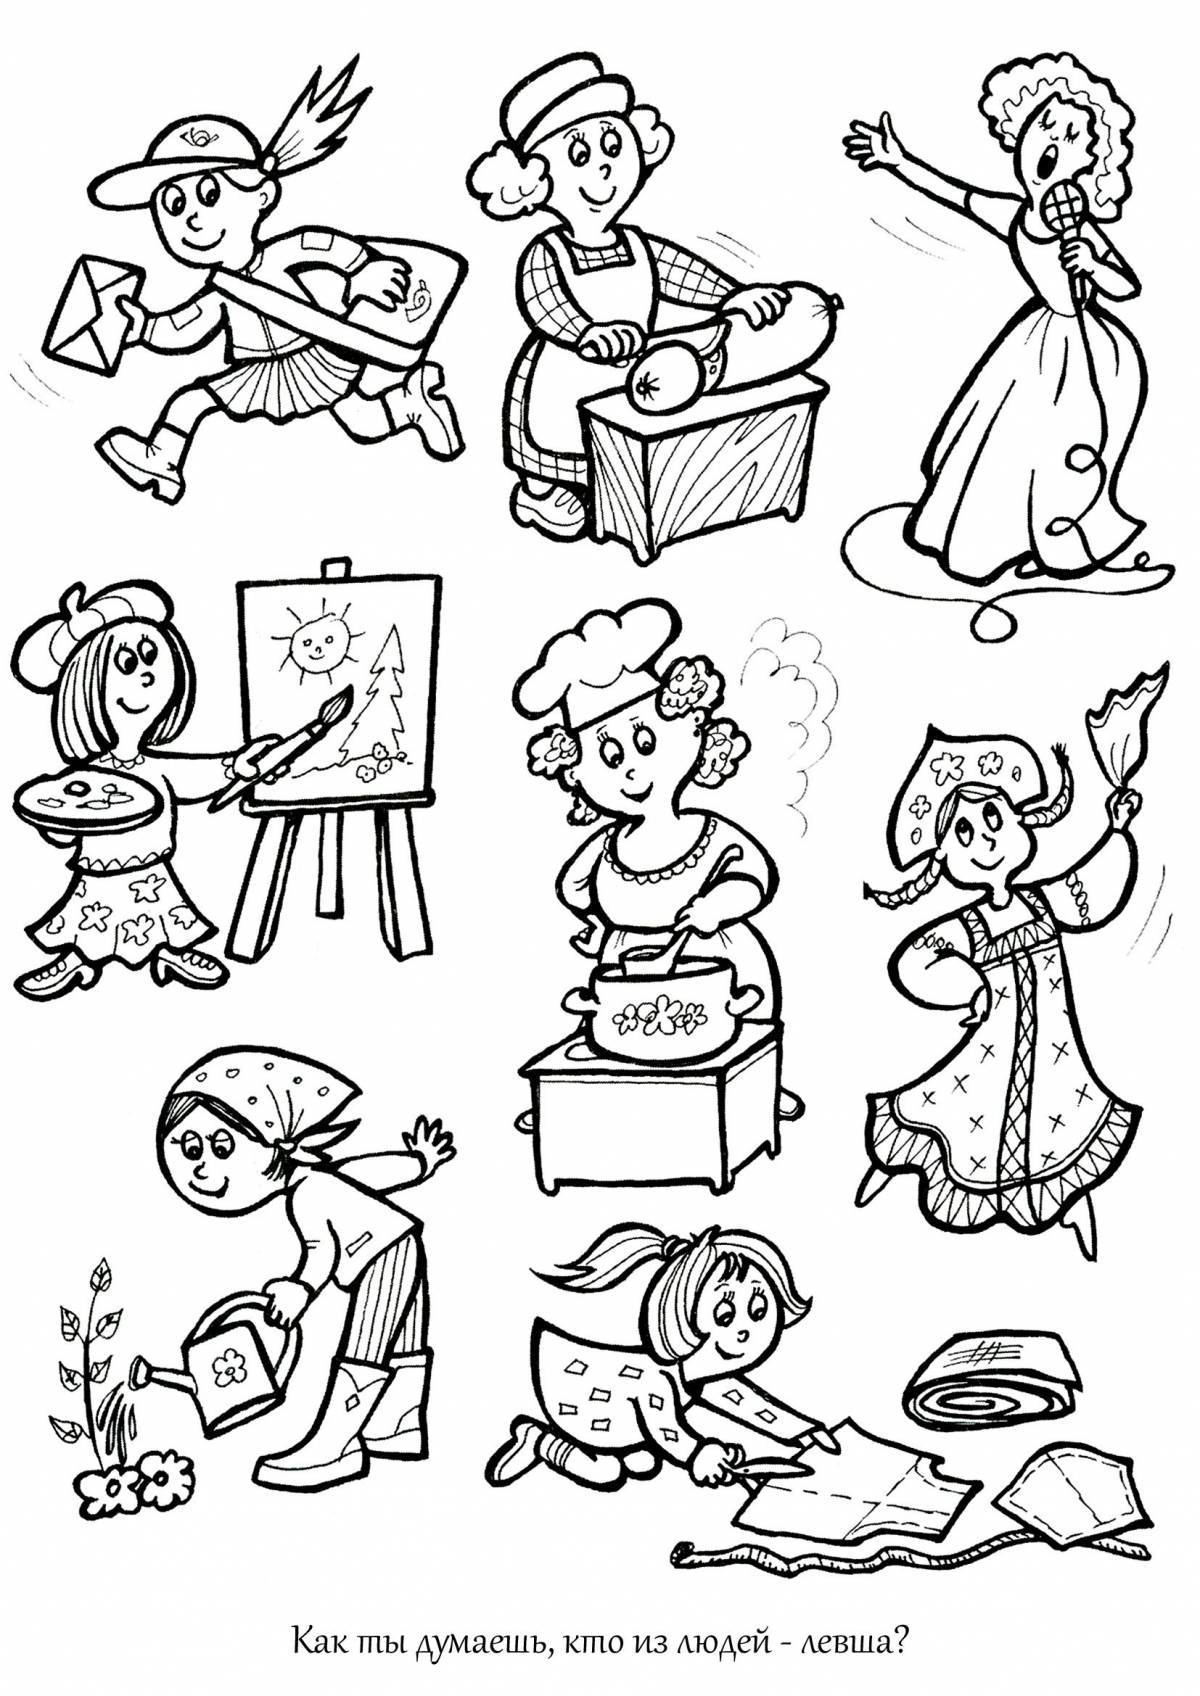 Creative profession coloring book for 3-4 year olds